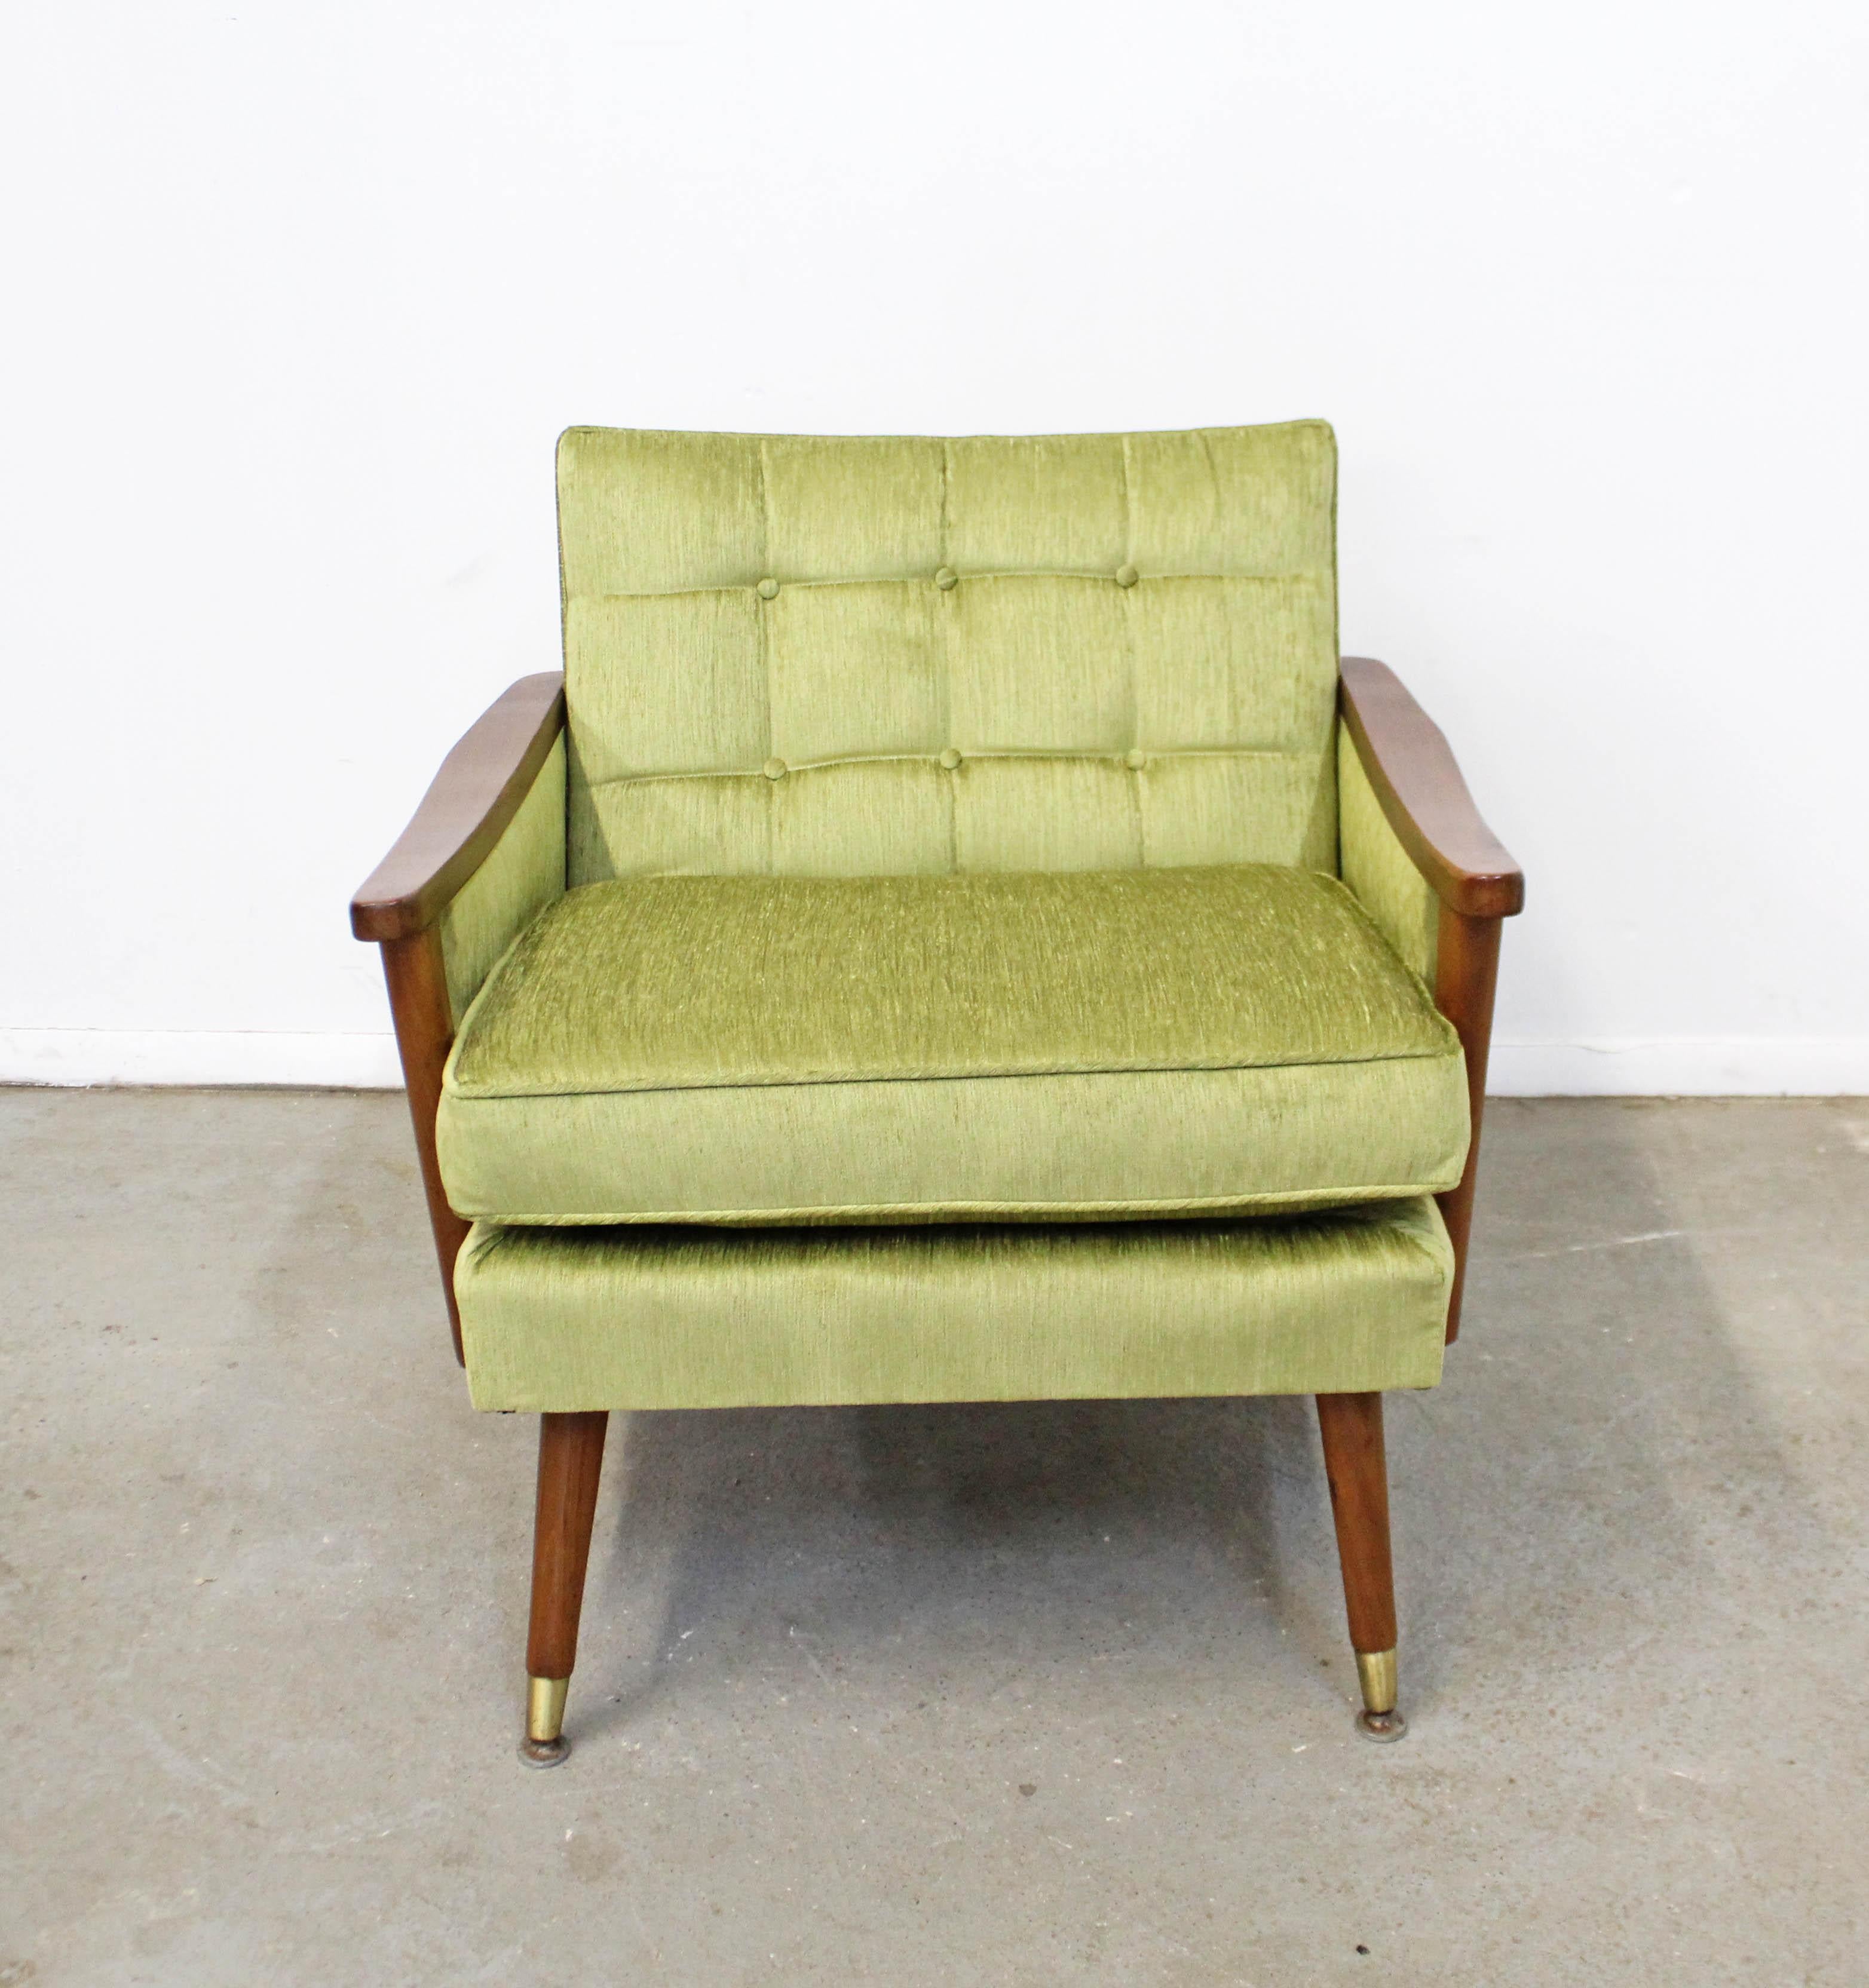 Offered is a beautifully restored vintage Mid-Century Modern lounge chair. This chair has been reupholstered with velvet 'Pear' fabric and has walnut arms and legs with brass feet. There are some minor scratches on the wood and wear on the brass